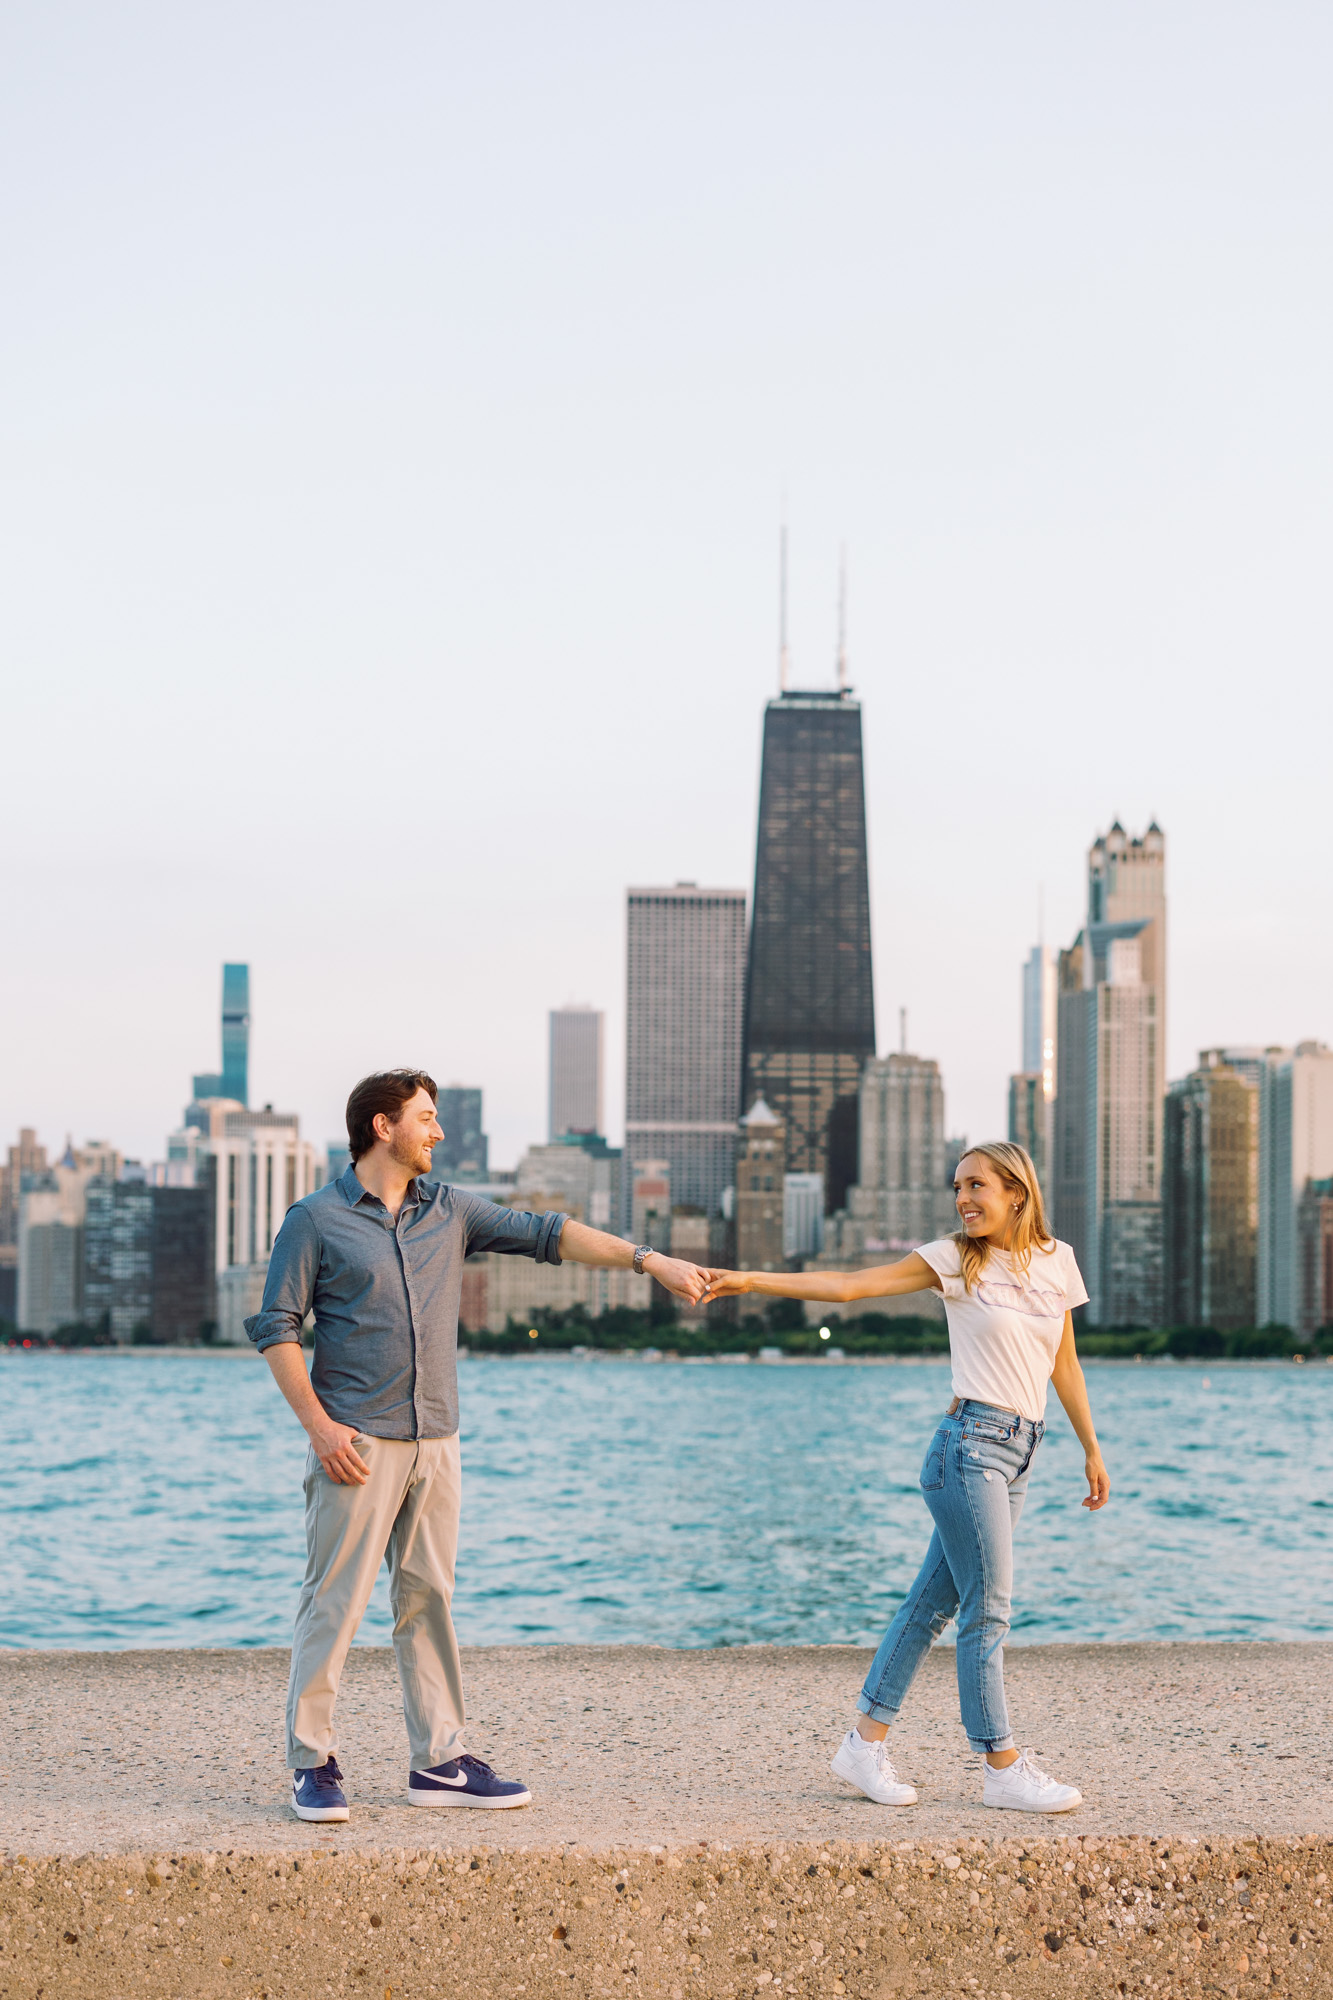 An engaged couple takes a stroll along the lakefront in Chicago.